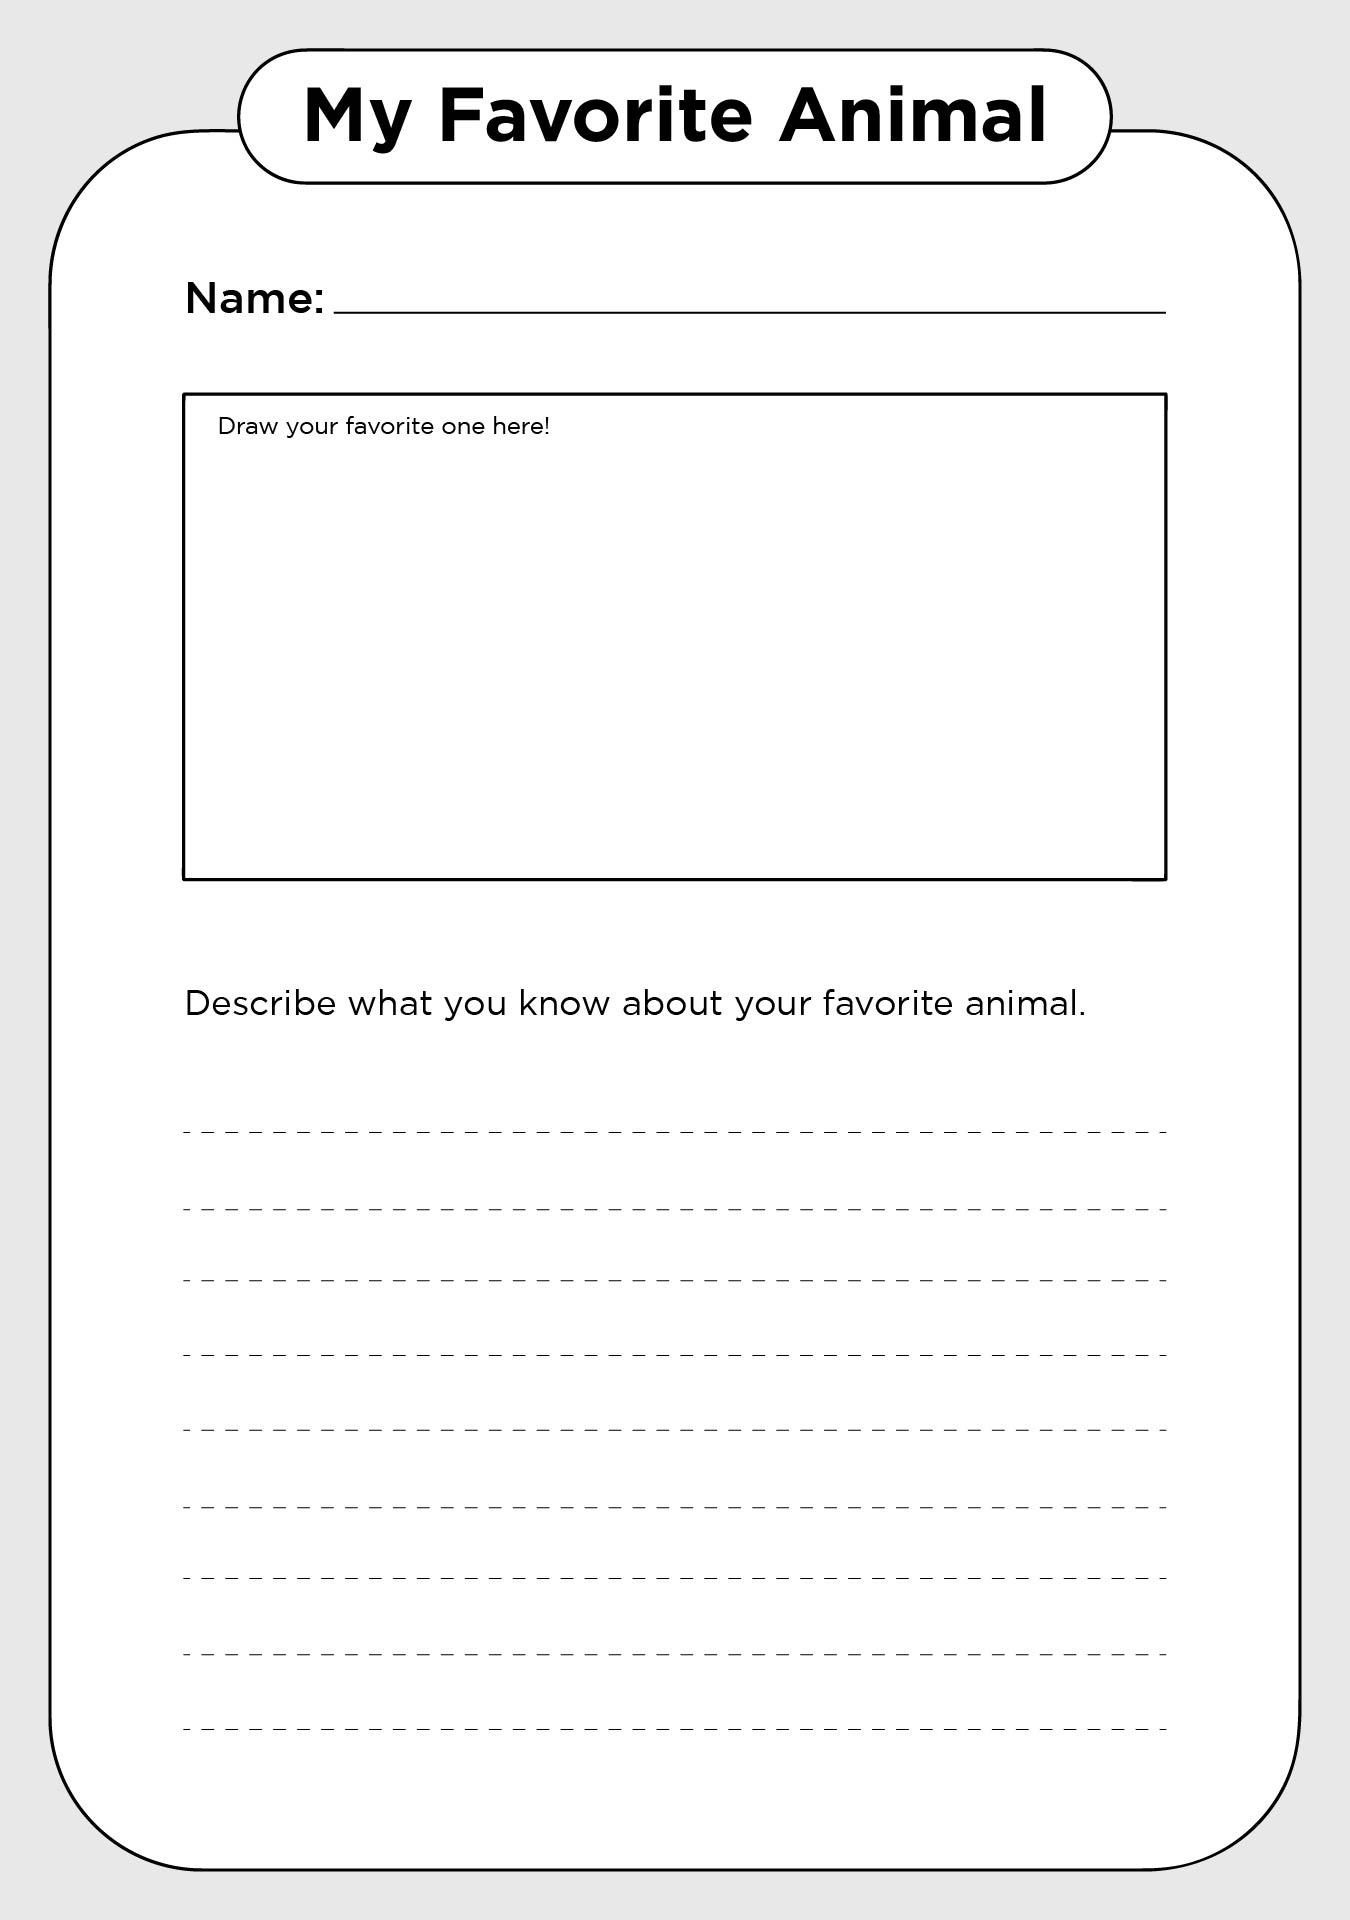 2nd-grade-writing-worksheets-word-lists-and-activities-greatschools